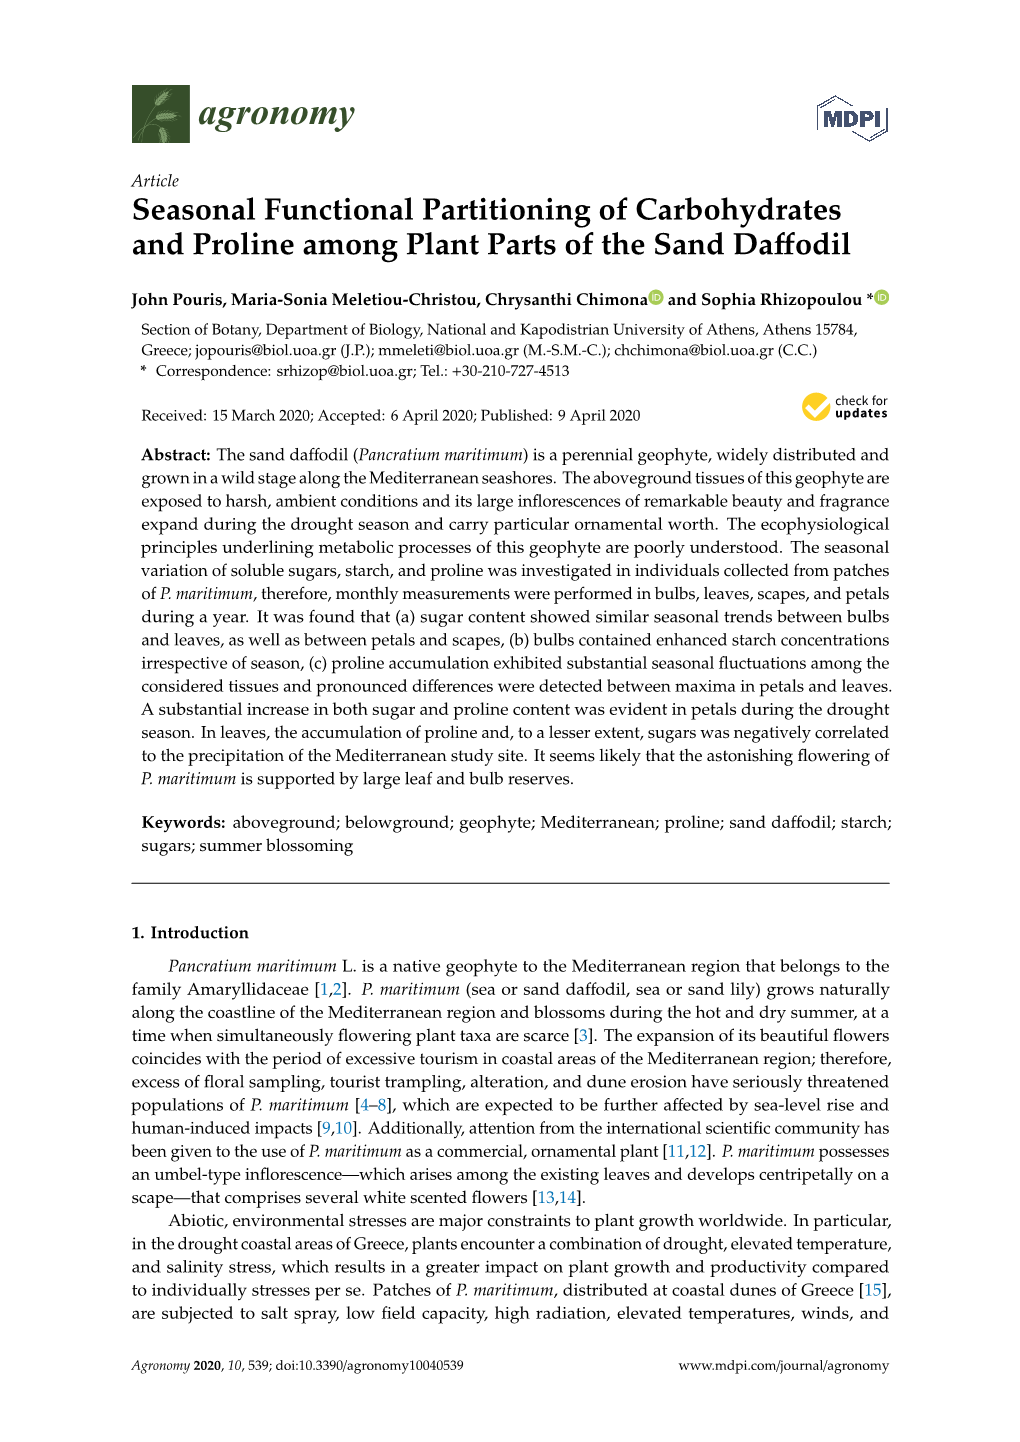 Seasonal Functional Partitioning of Carbohydrates and Proline Among Plant Parts of the Sand Daﬀodil